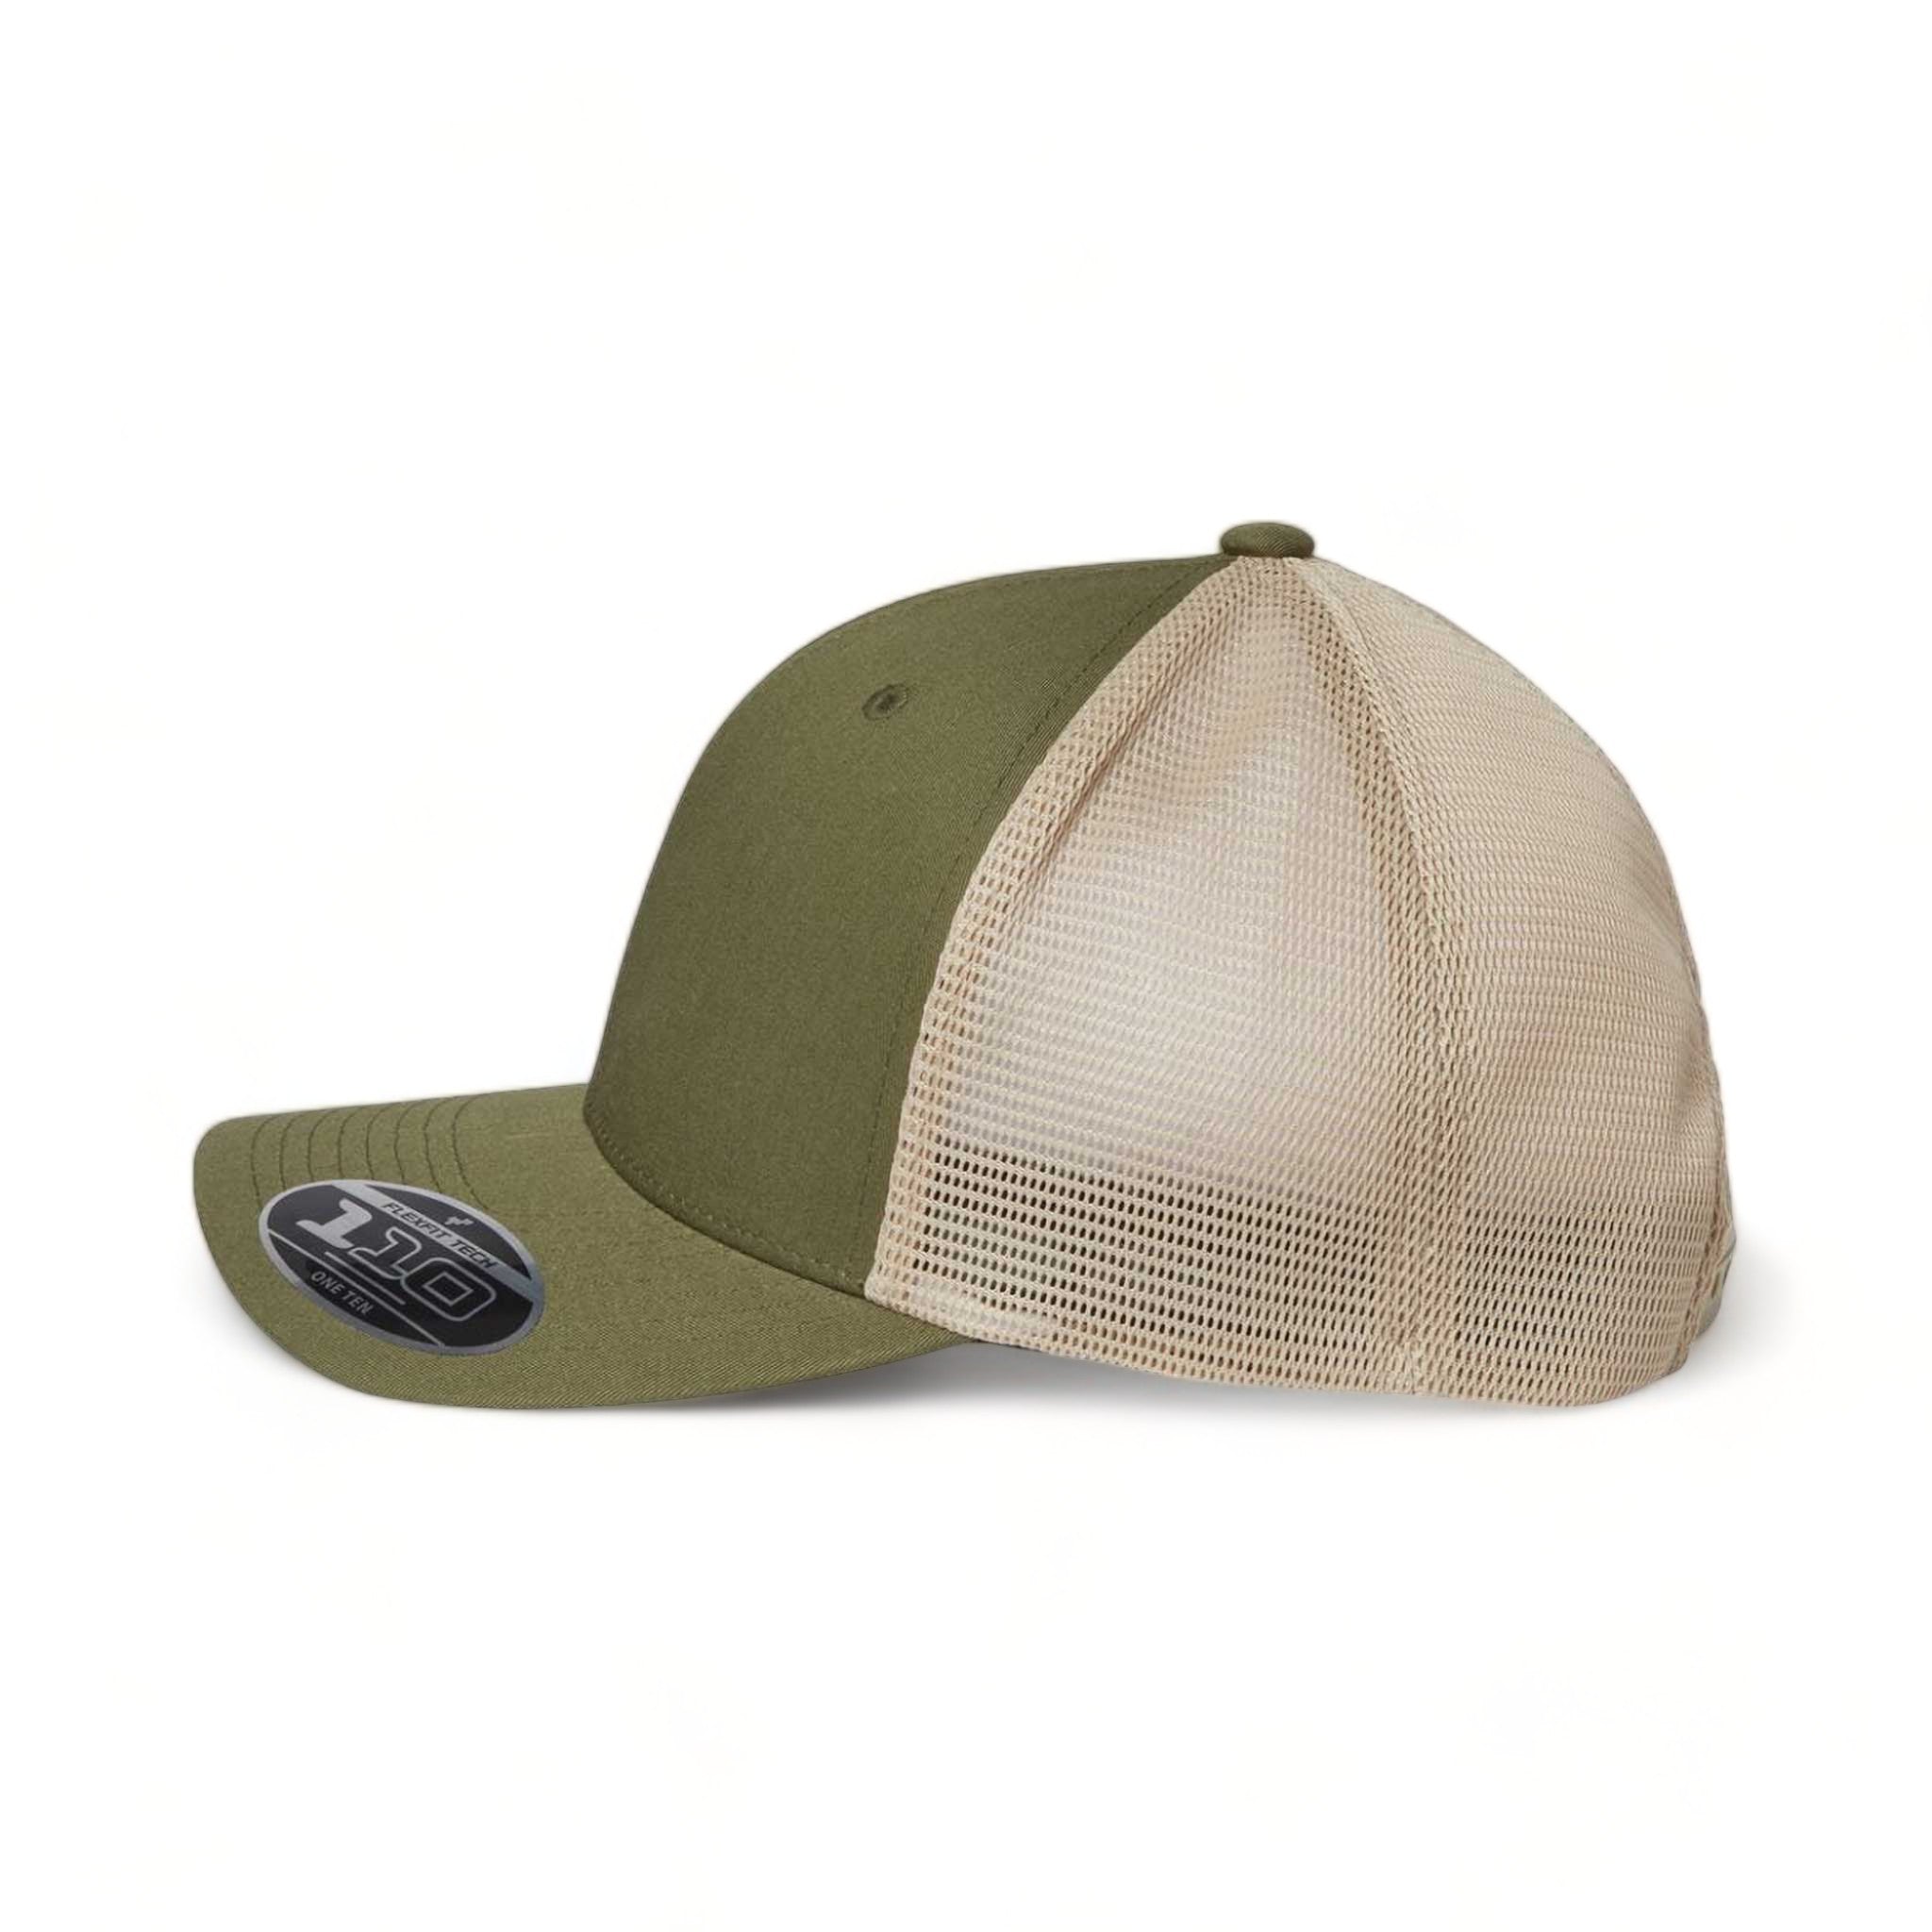 Side view of Flexfit 110M custom hat in olive and khaki